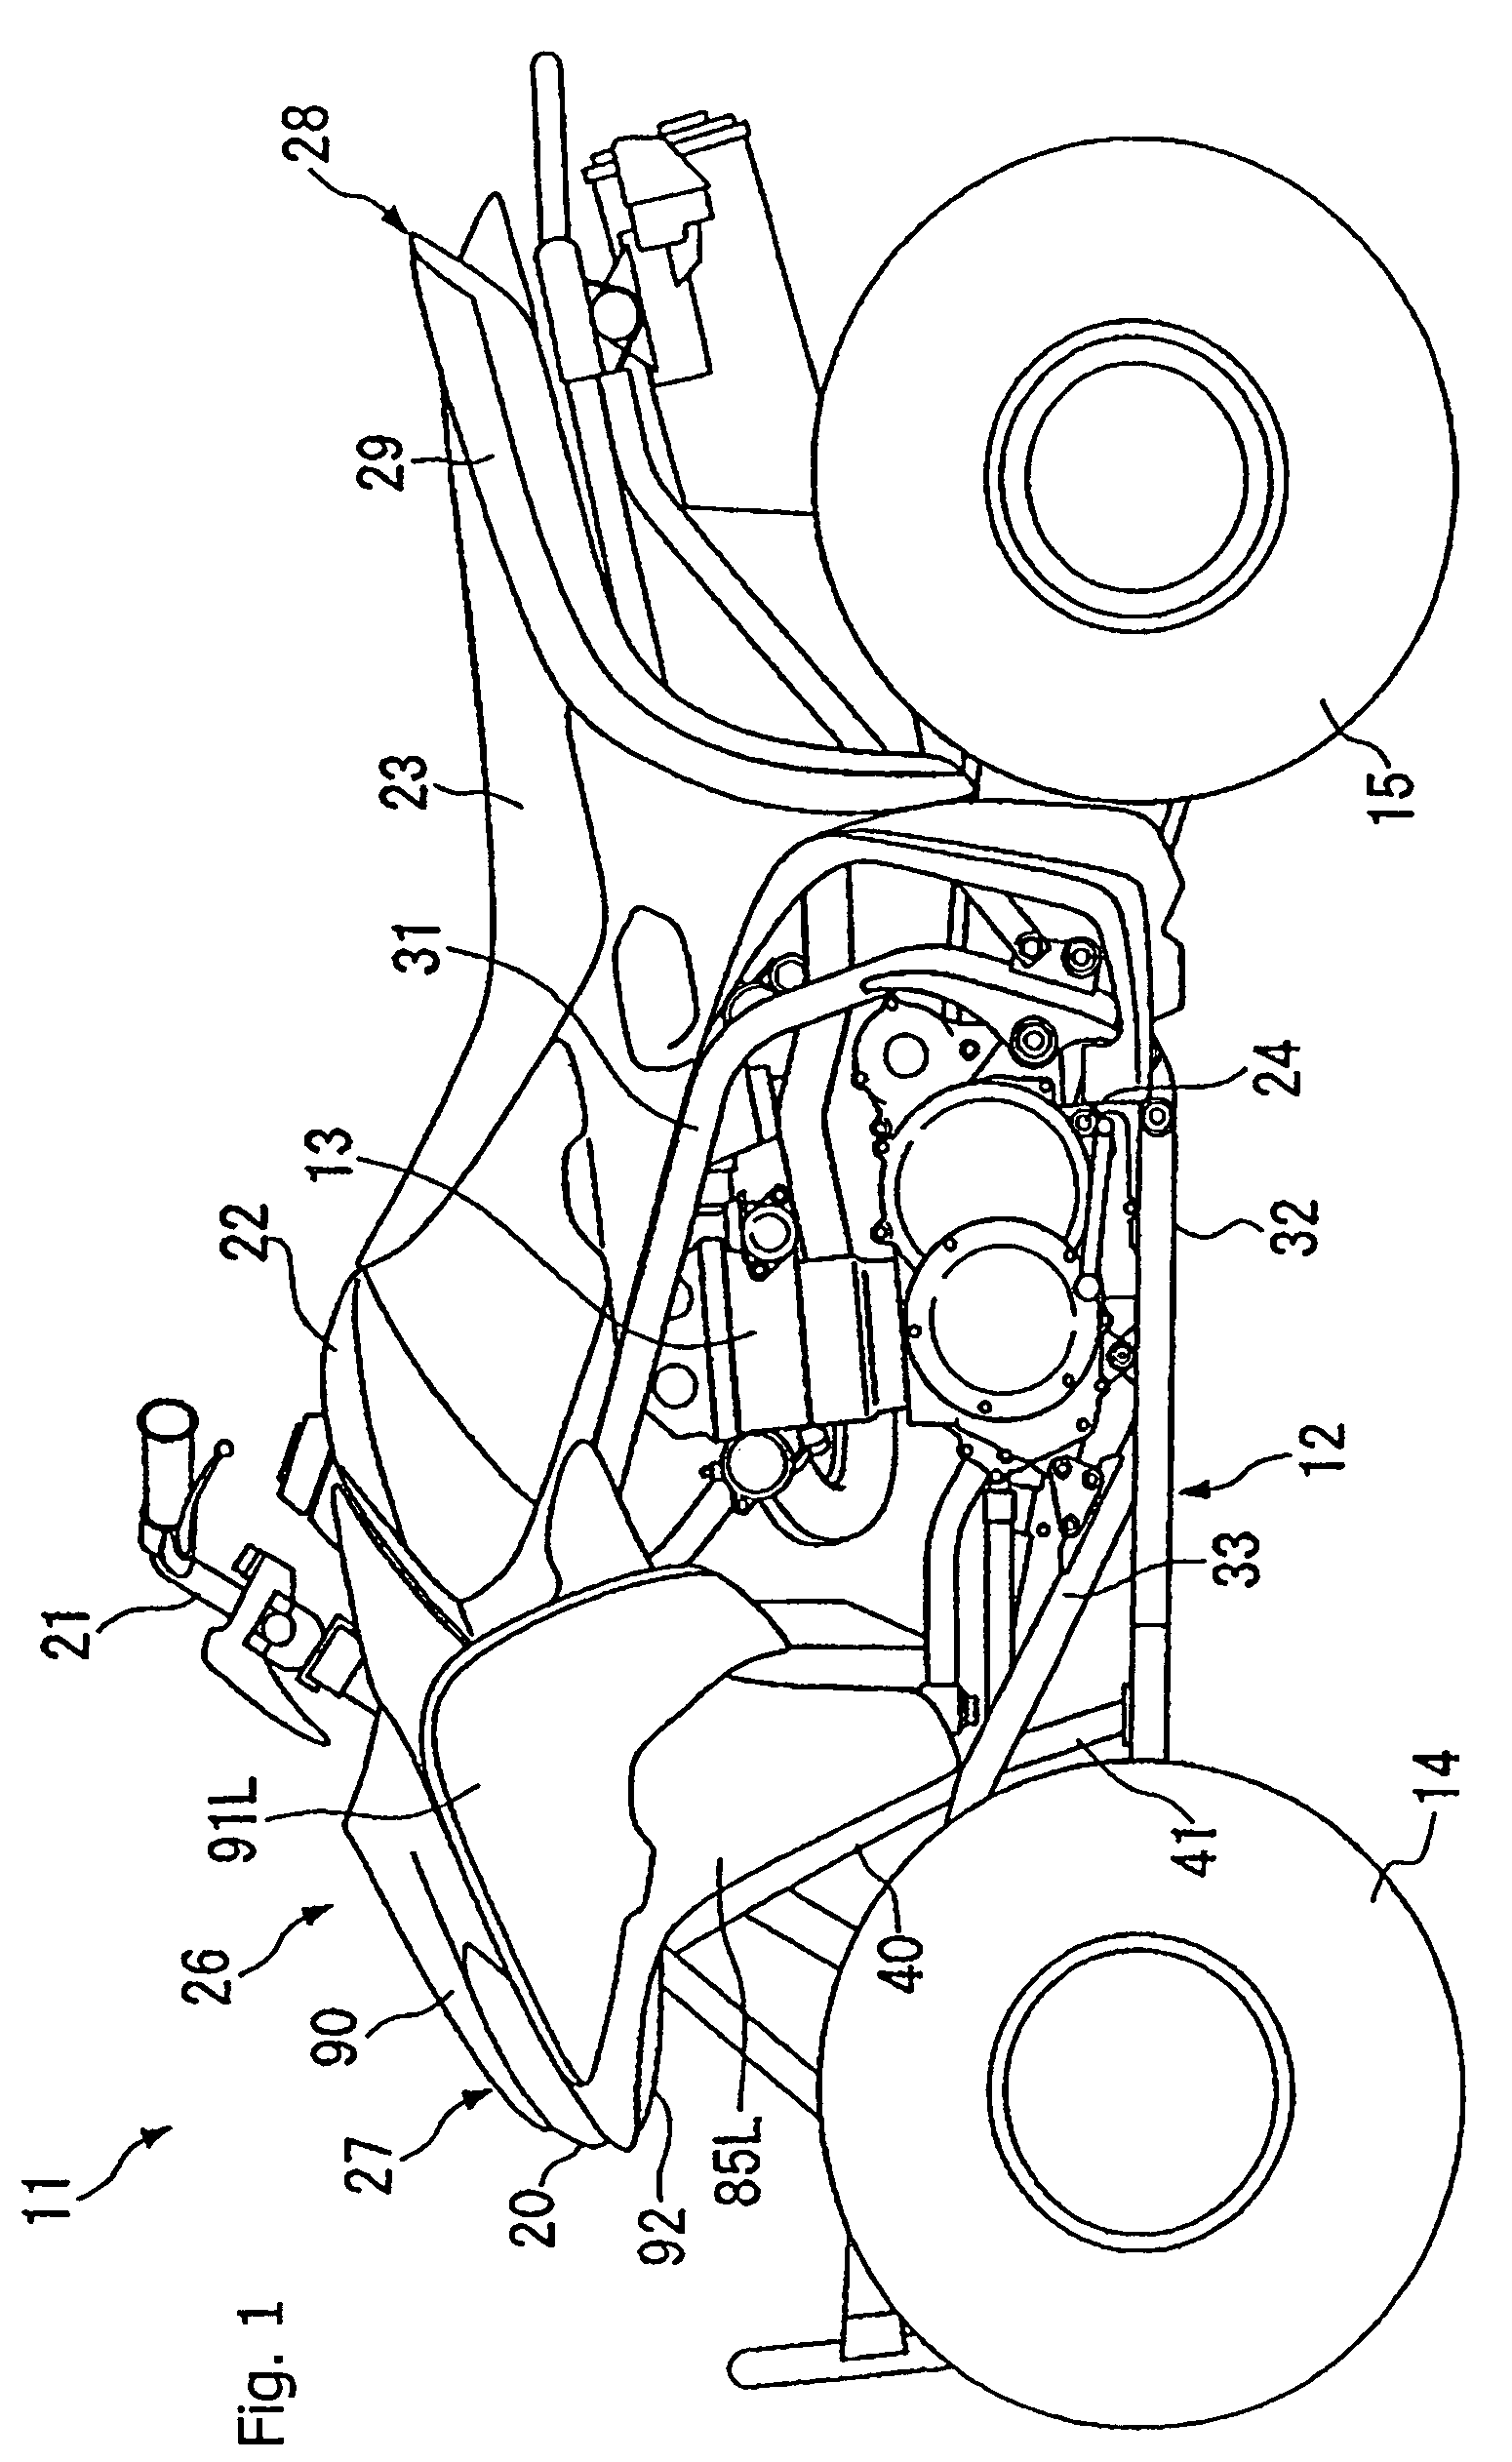 Front end components for a saddle-type vehicle